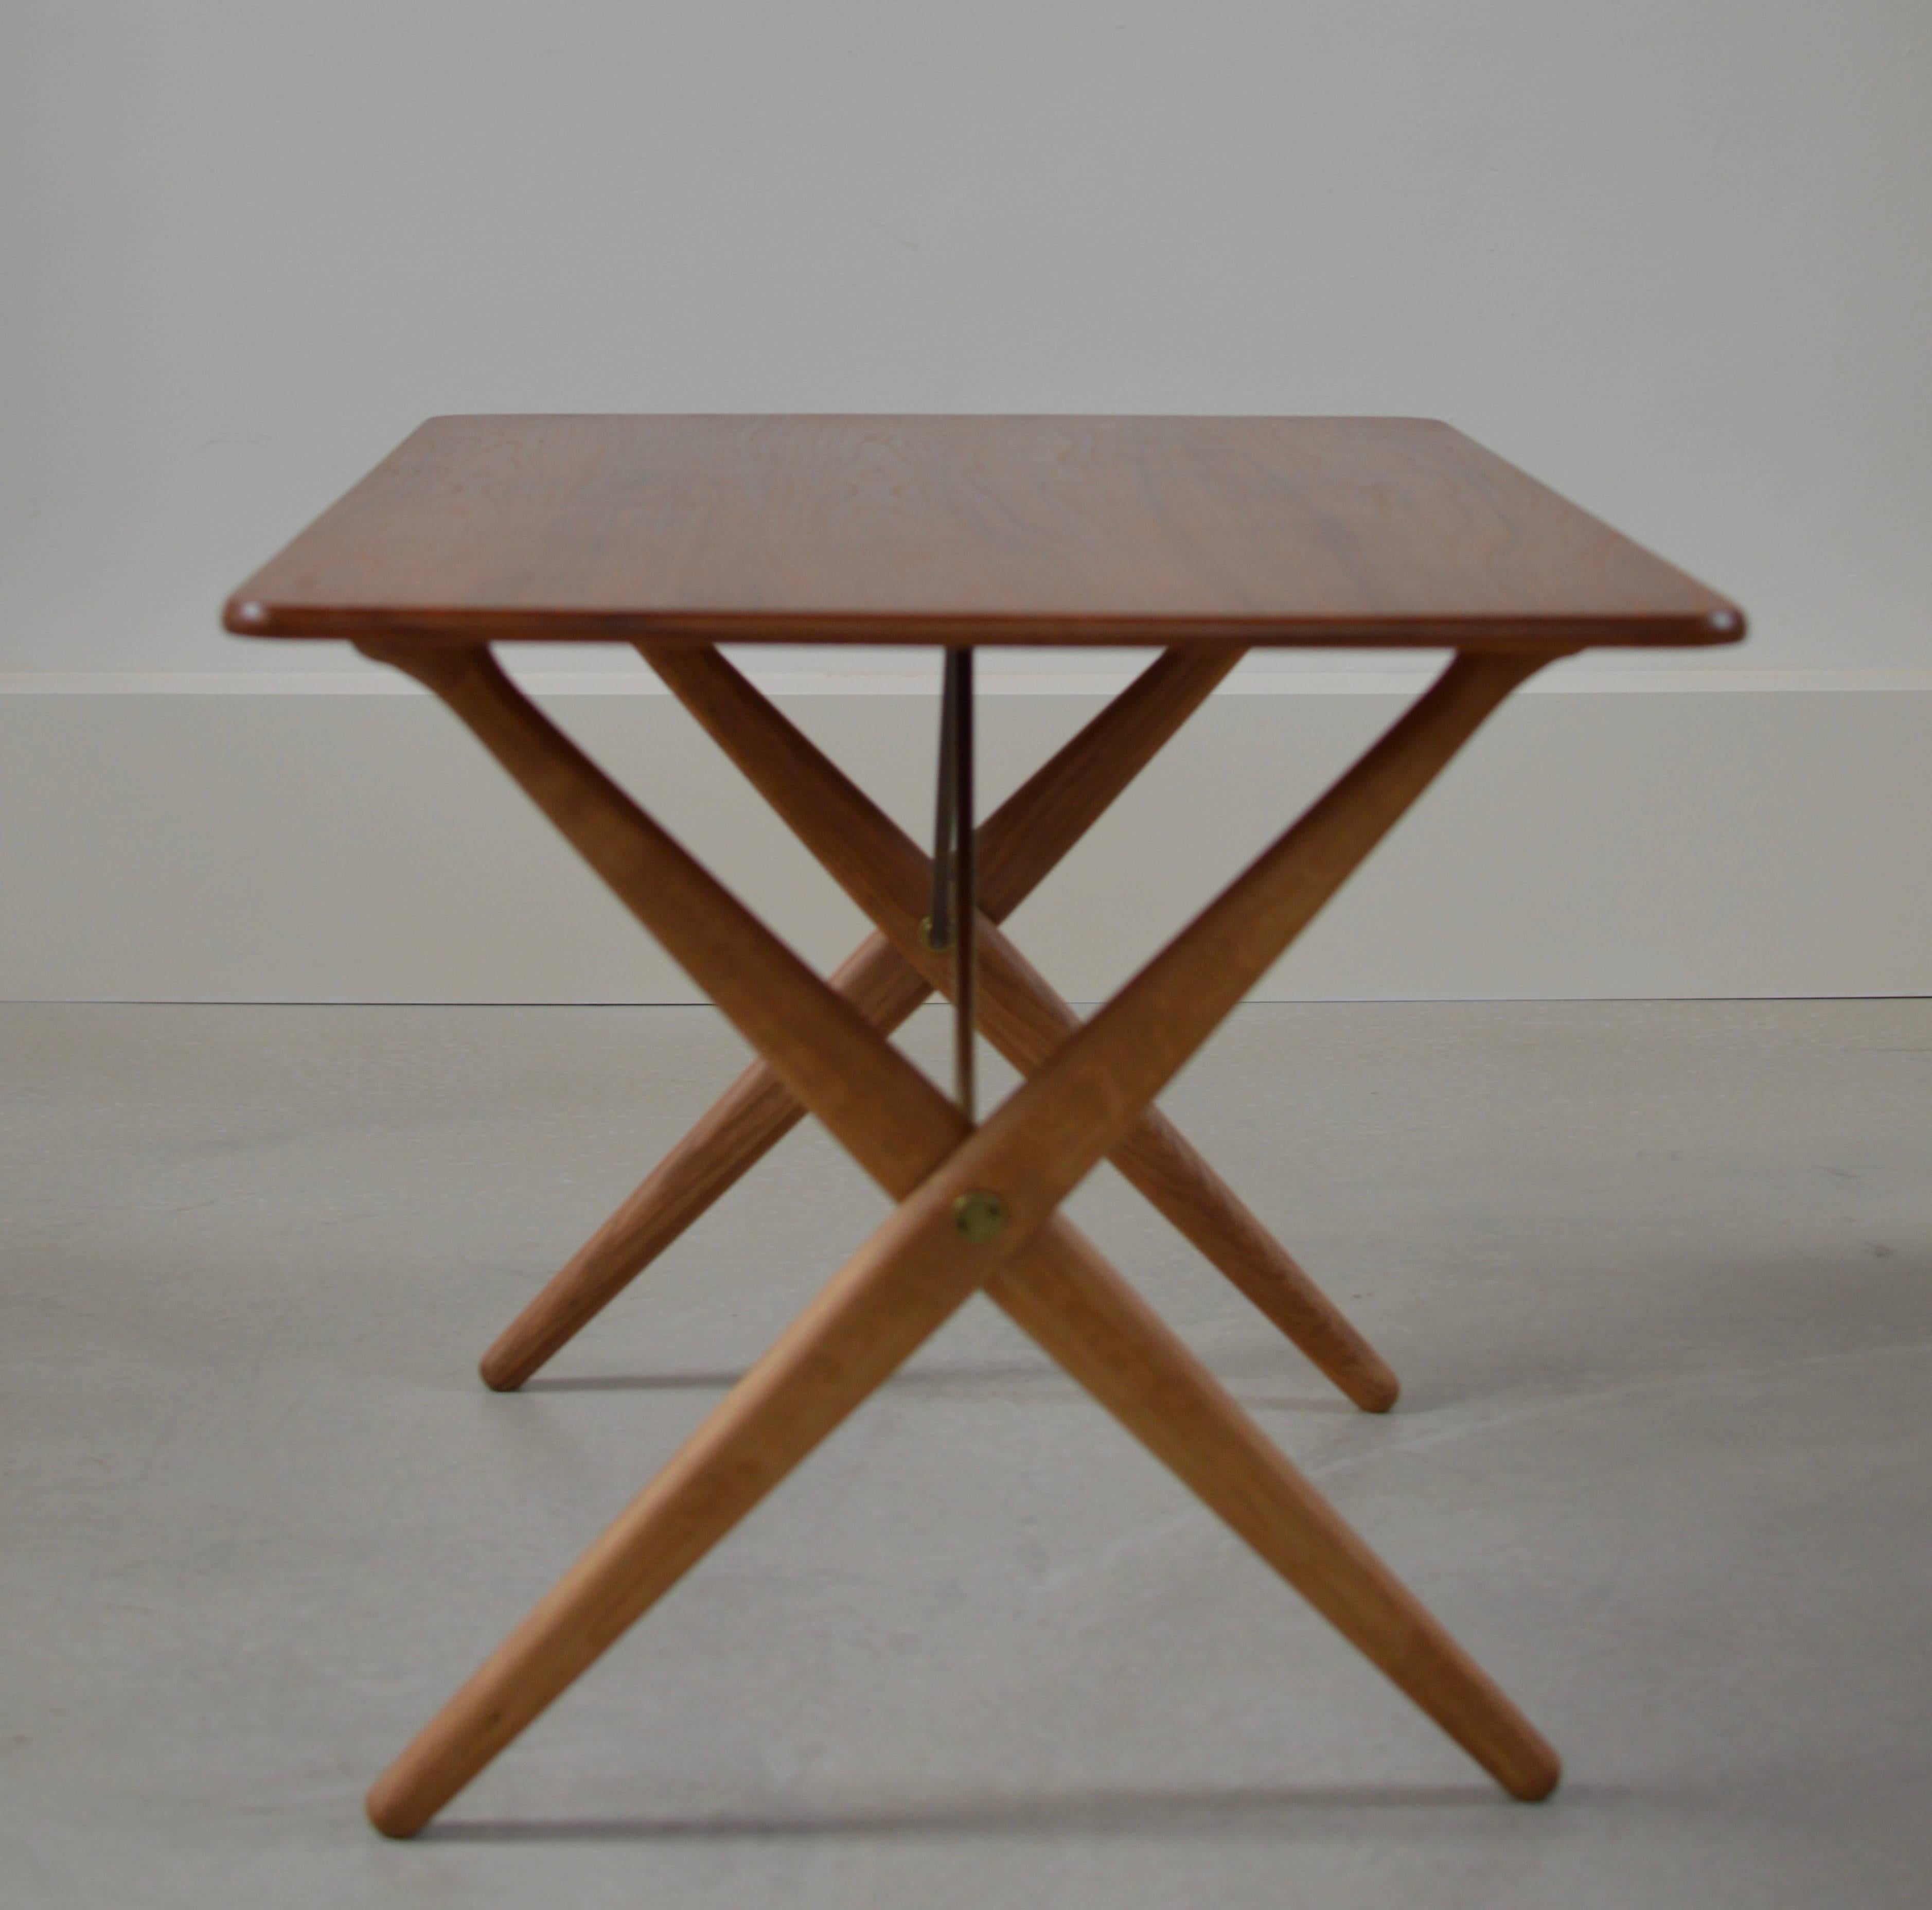 Smaller cross legged table by Hans Wegner for Andreas Tuck, model AT 308 designed in 1955 for Andreas Tuck, as signed with burn mark. 
Table top of teakwood with contrasting cross legged base of solid oak with brass stretchers.

A versatile piece